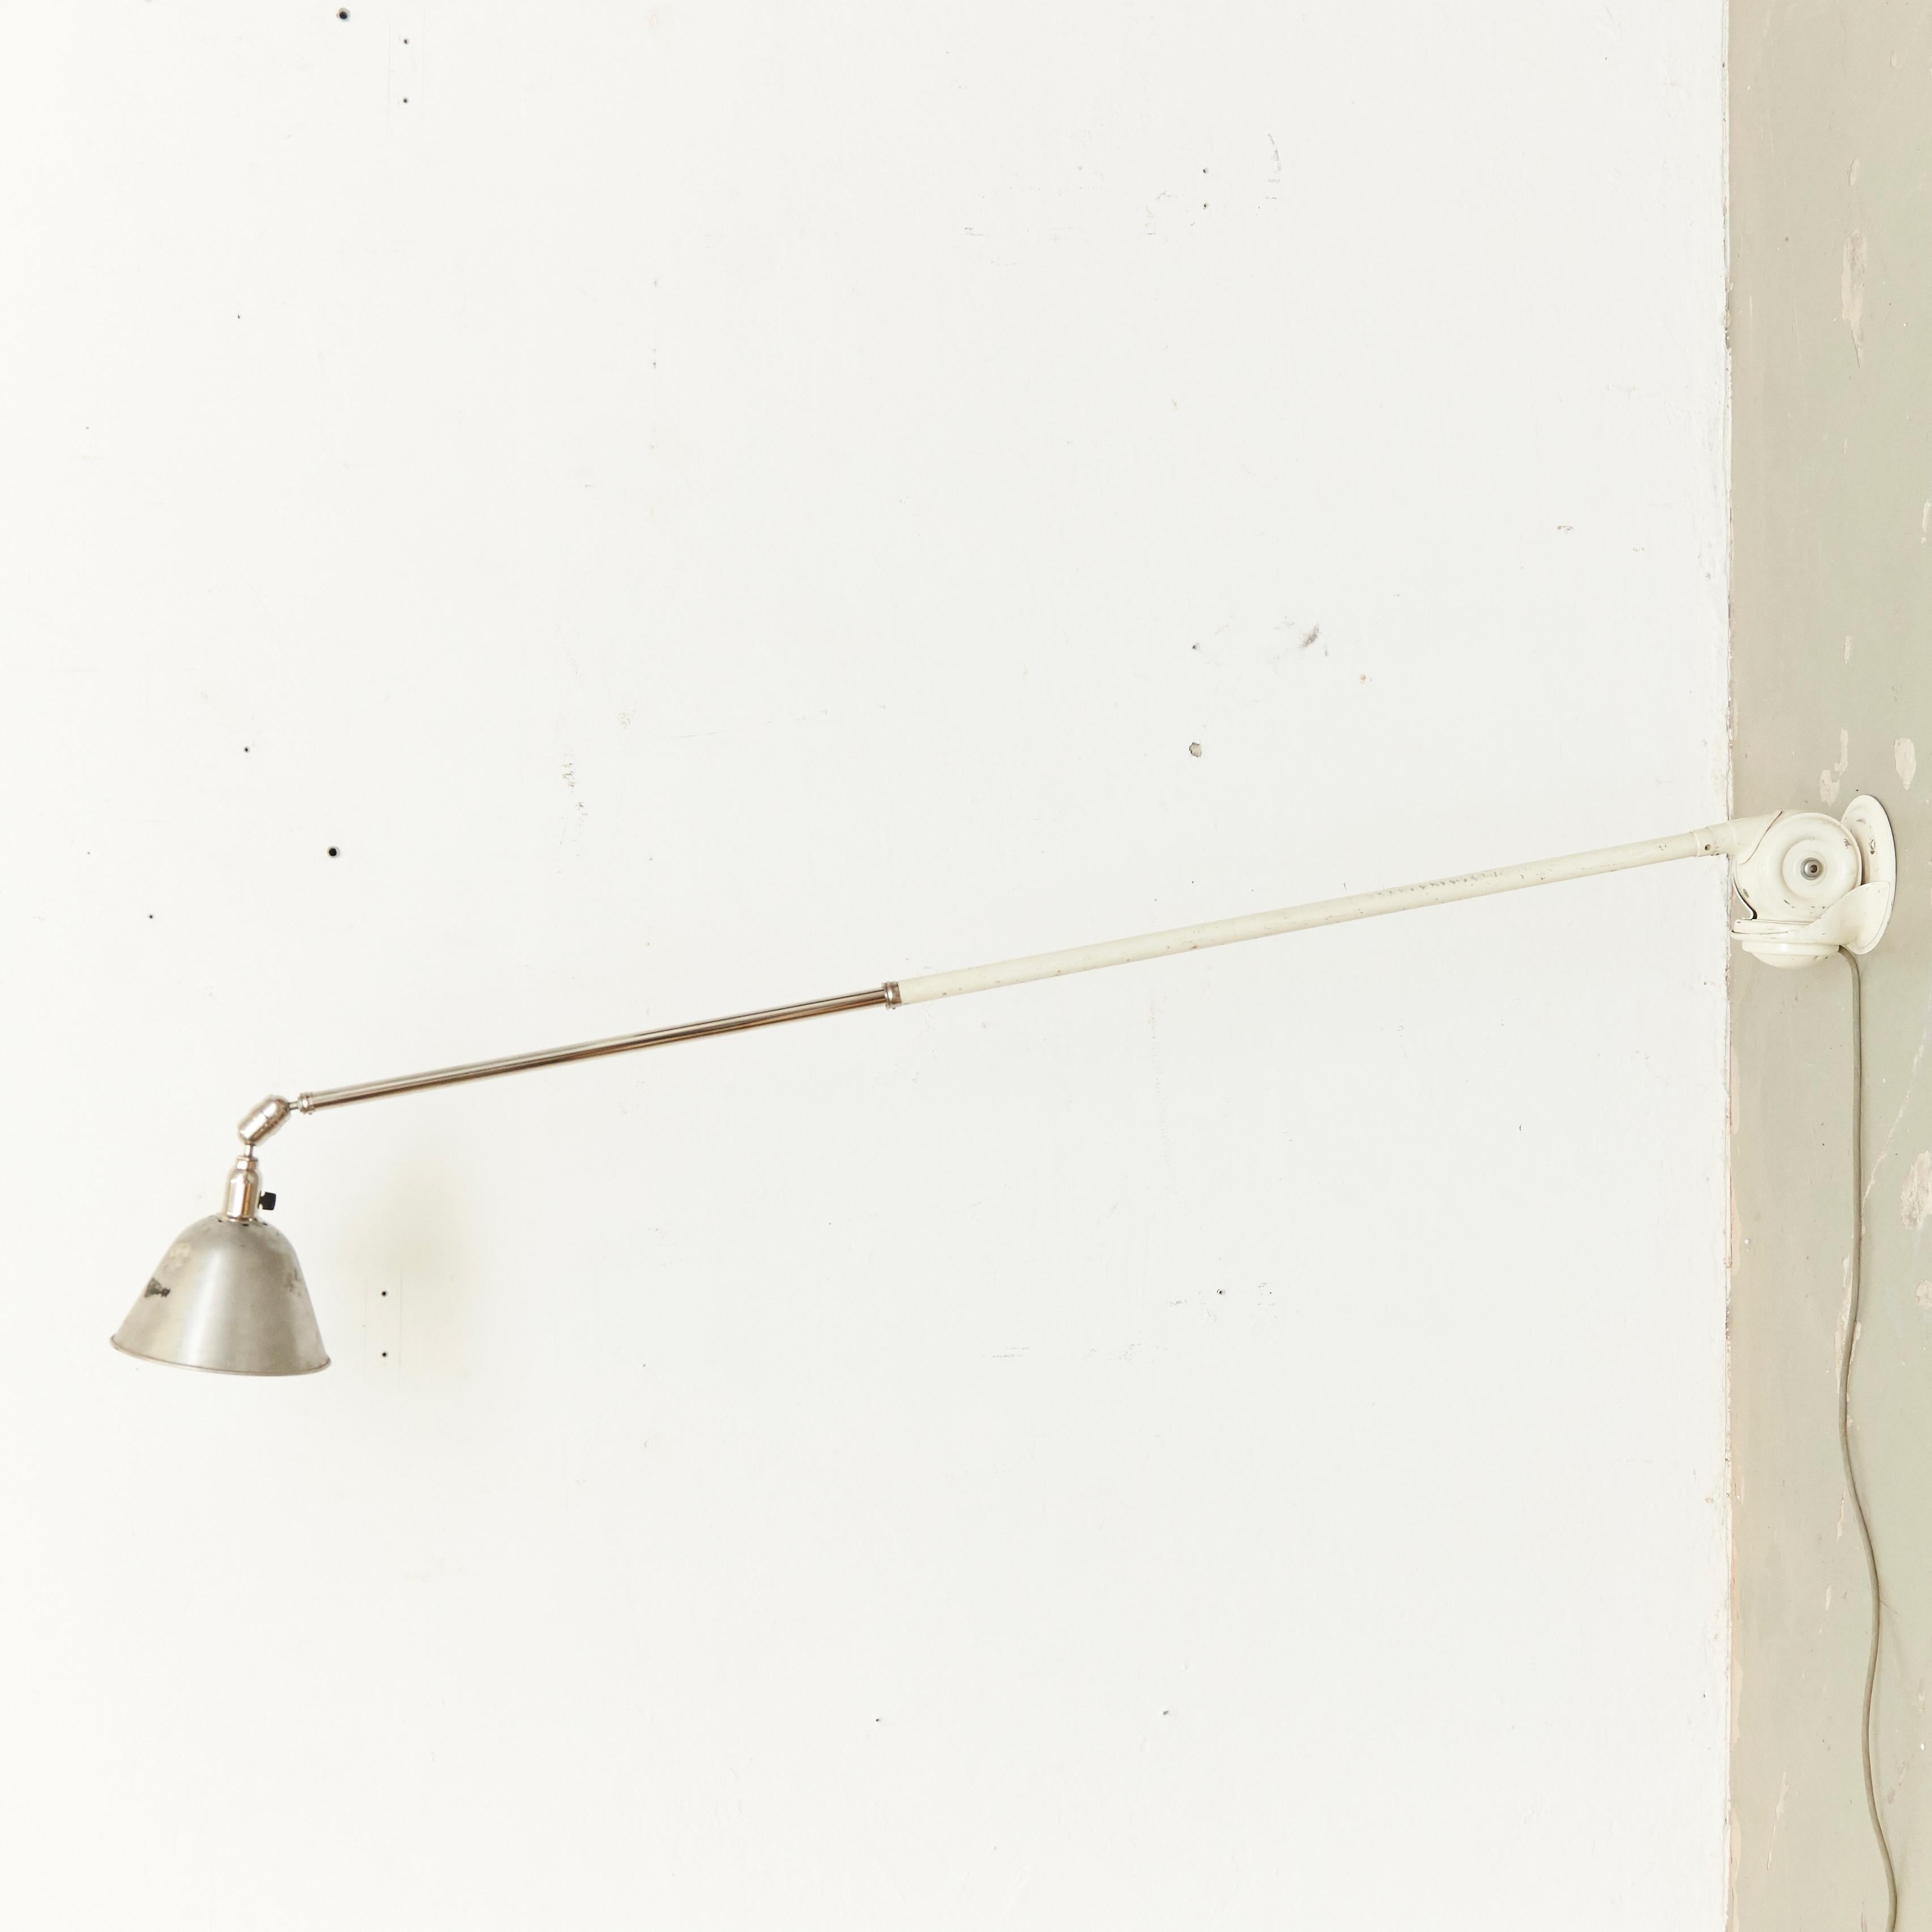 Telescopic wall lamp designed by Johan Petter Johansson.
Manufactured by Triplex, (Sweden), circa 1930.
Aluminium and steel.

In good original condition, with minor wear consistent with age and use, preserving a beautiful patina.